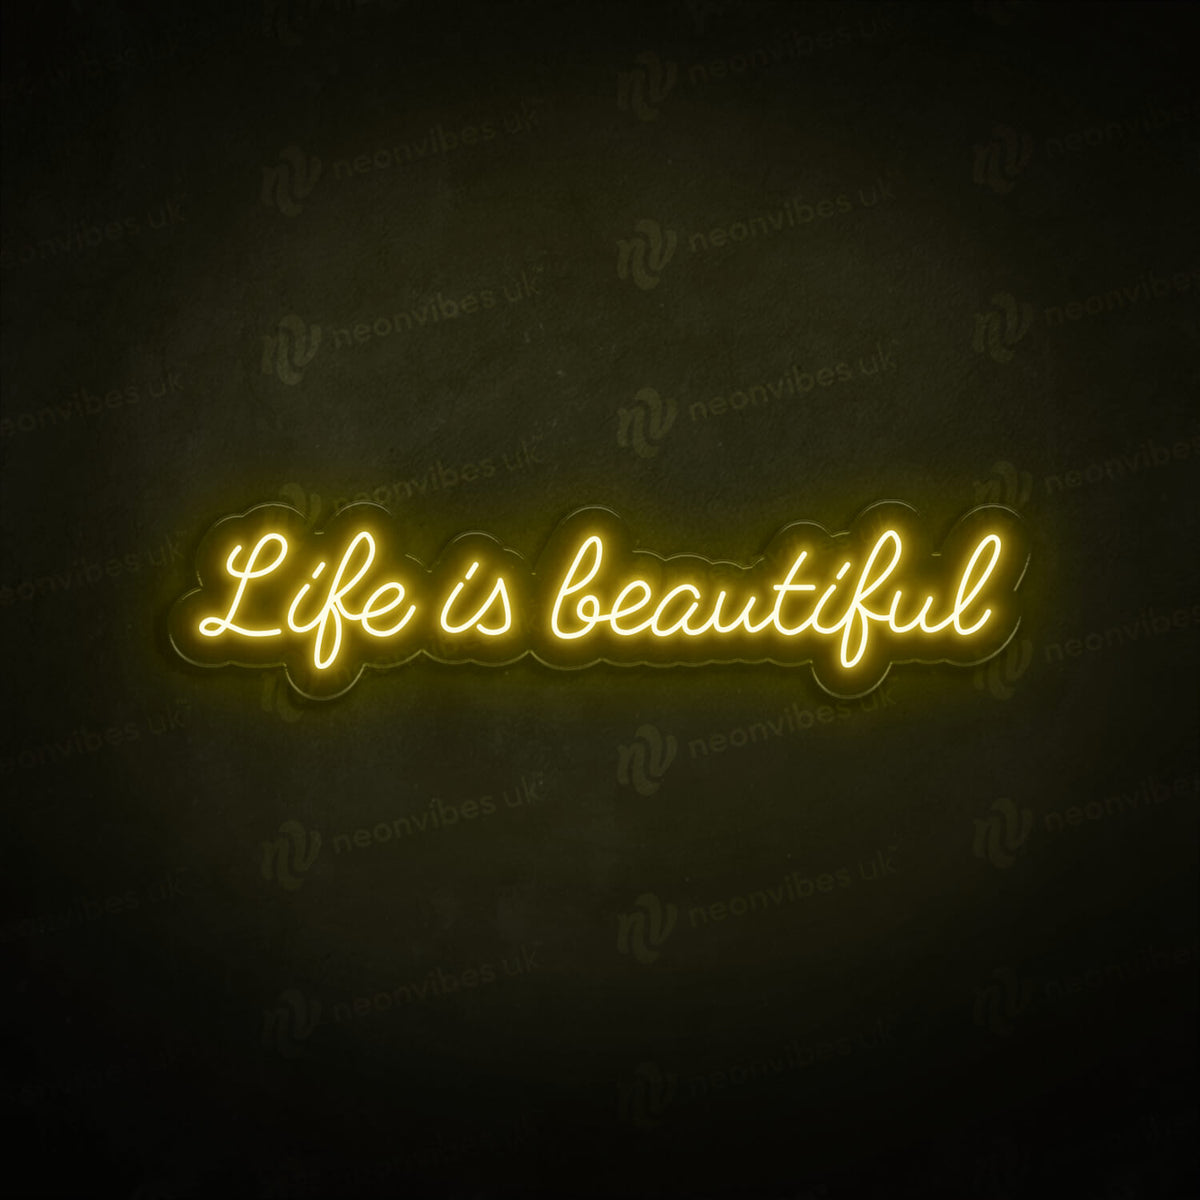 Live Is Beautiful neon sign